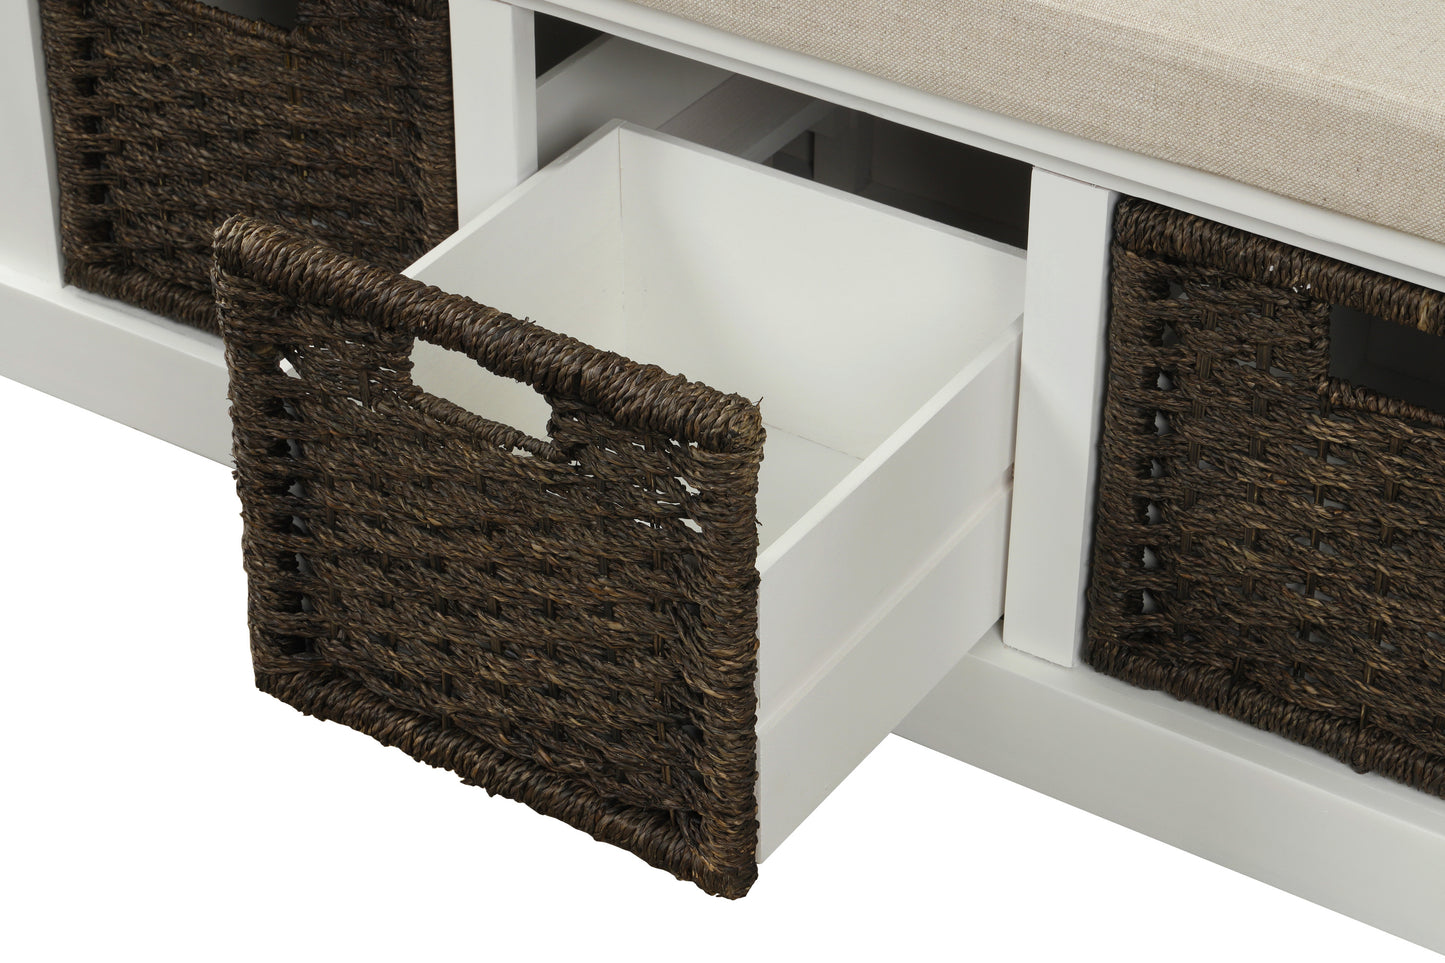 Rustic Storage Bench with 3 Removable Classic Rattan Basket, Entryway Bench Storage Bench with Removable Cushion (White)